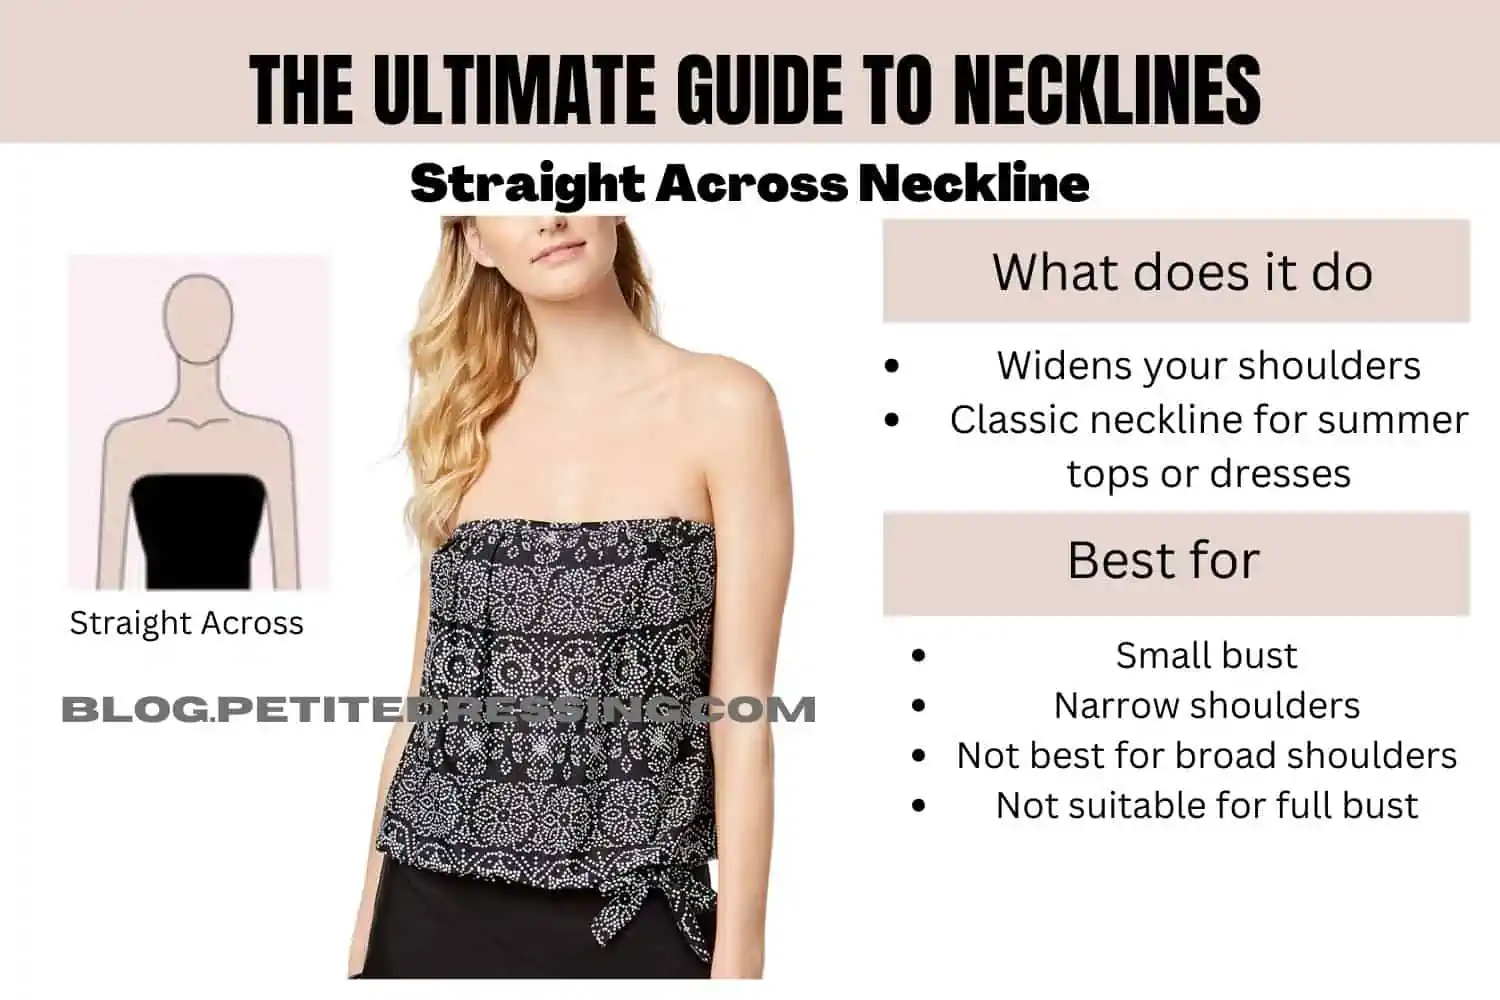 A square neckline is ideal for those with broad shoulders as it